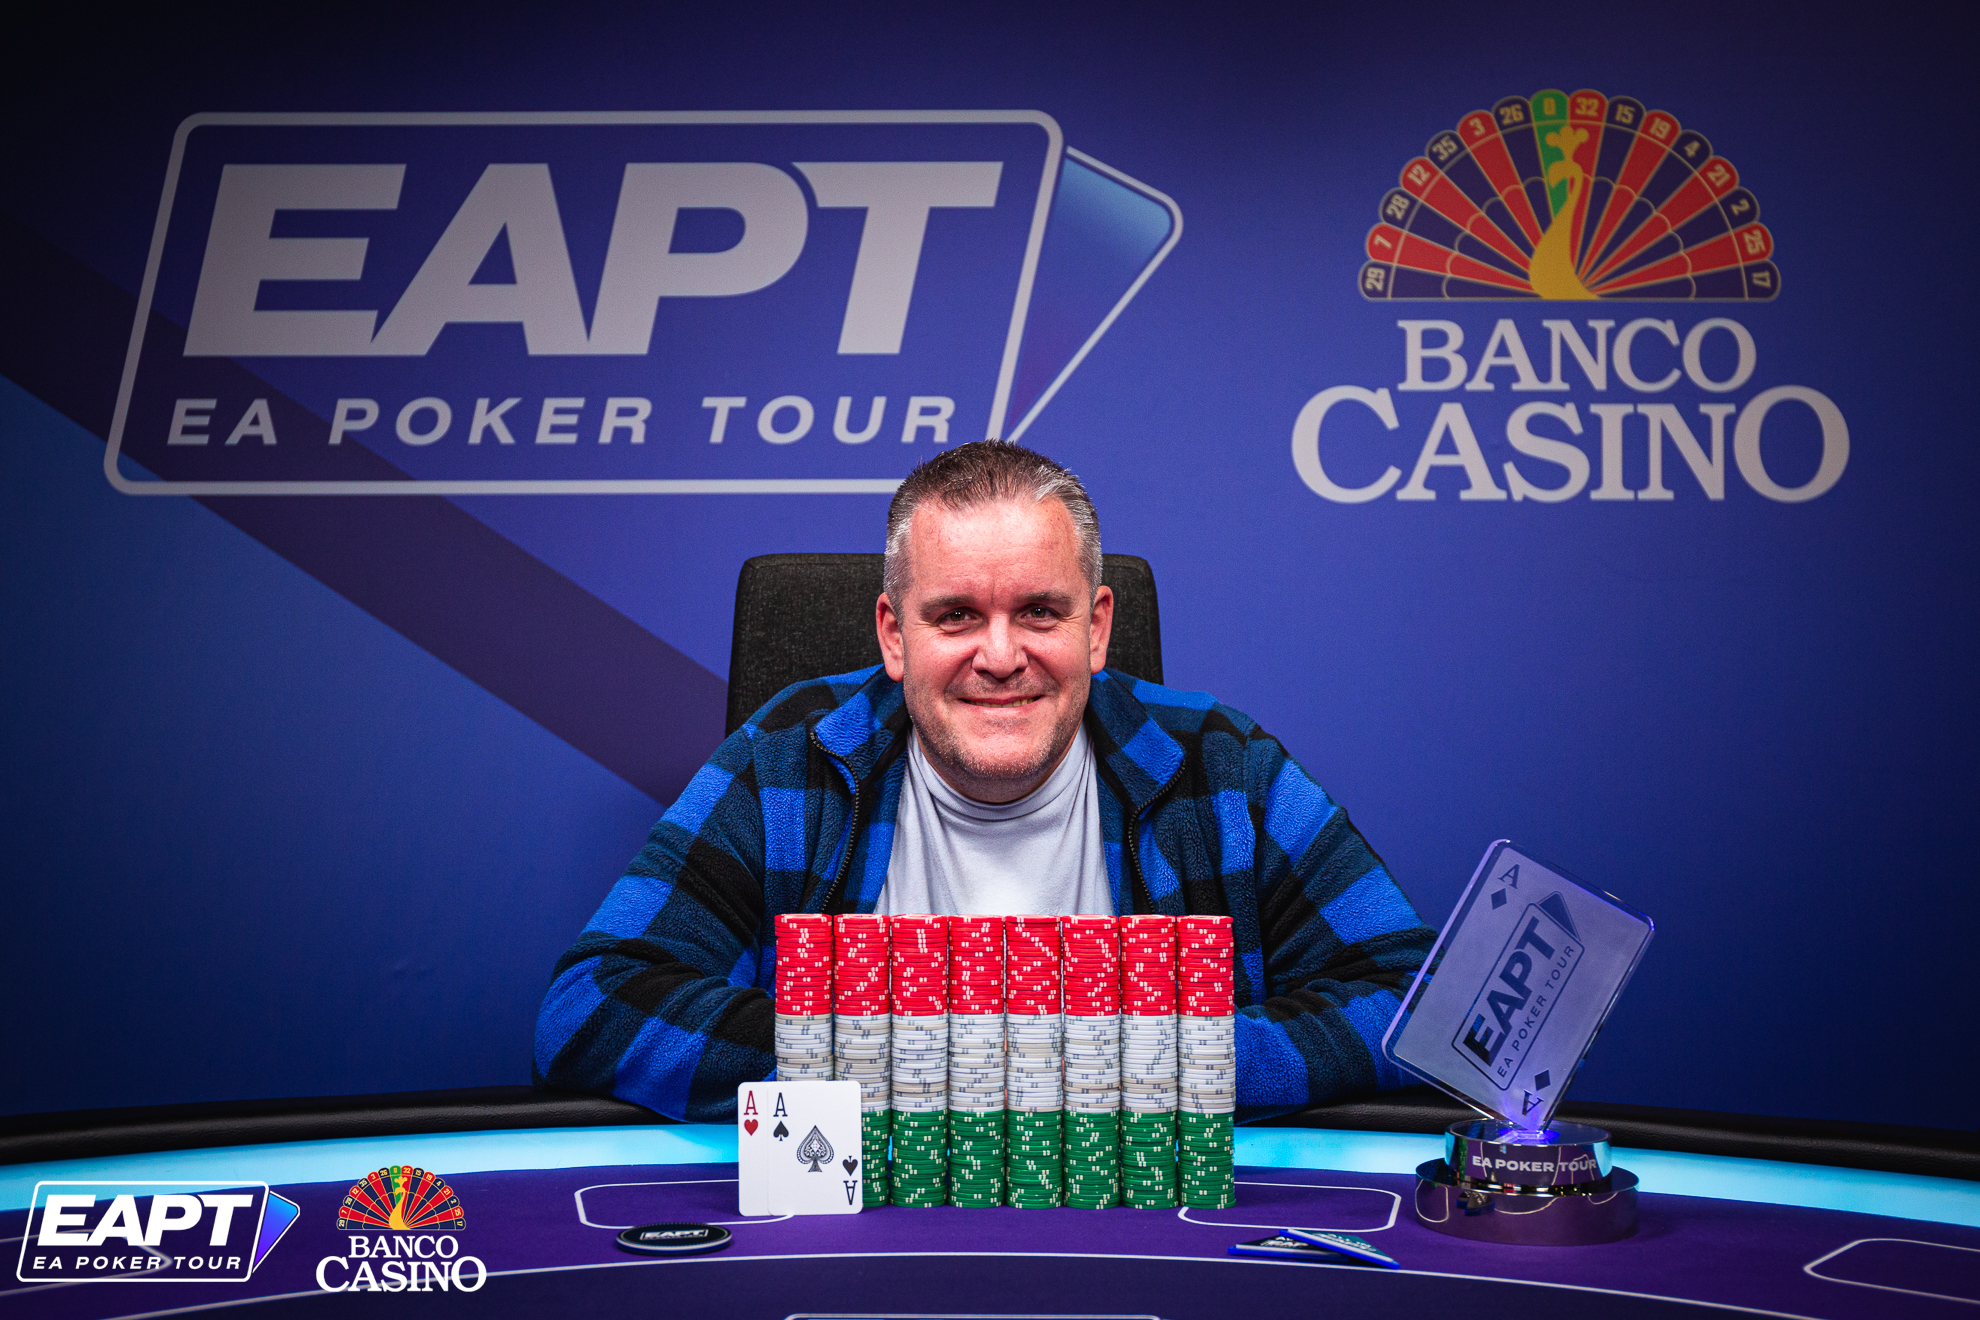 MIKLOS ZSUFFA TRIUMPHED IN THE EAPT MAIN EVENT AND TOOK HOME 37,630€ FROM BANCO CASINO!